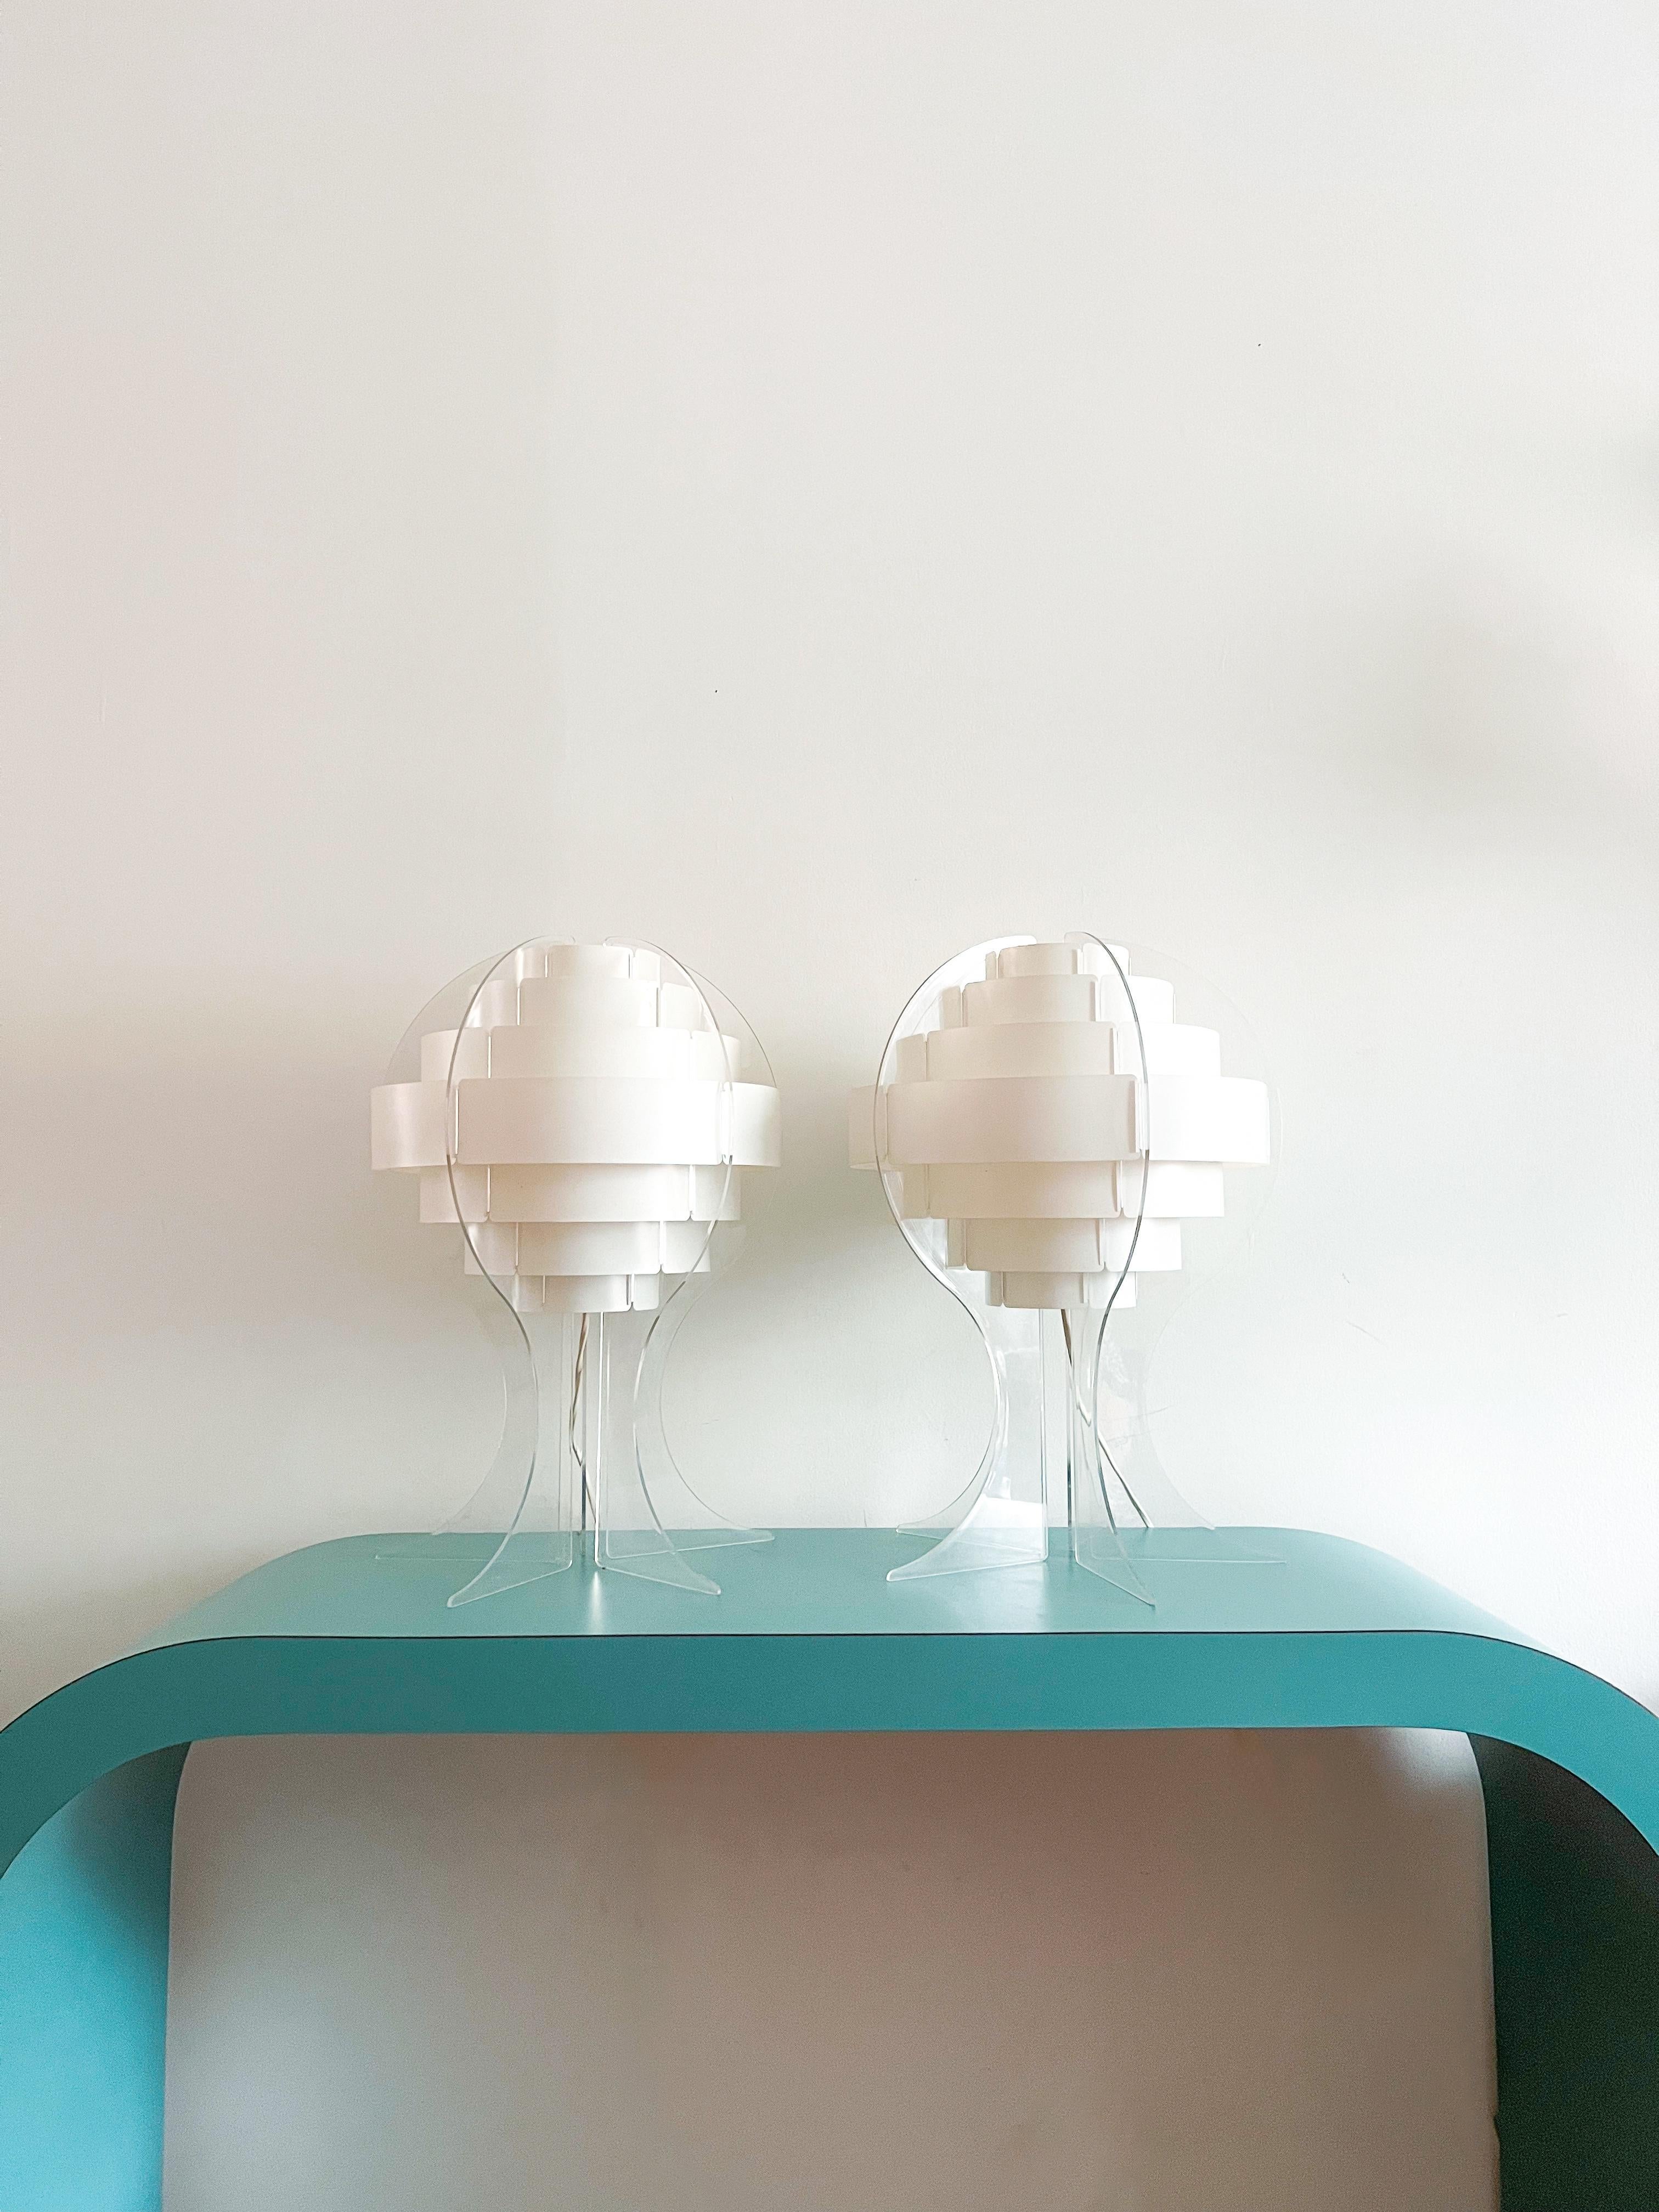 Flemming Brylle & Preben Jacobsen Space Age Table Lamp, Denmark, 1960's In Good Condition For Sale In Toronto, CA